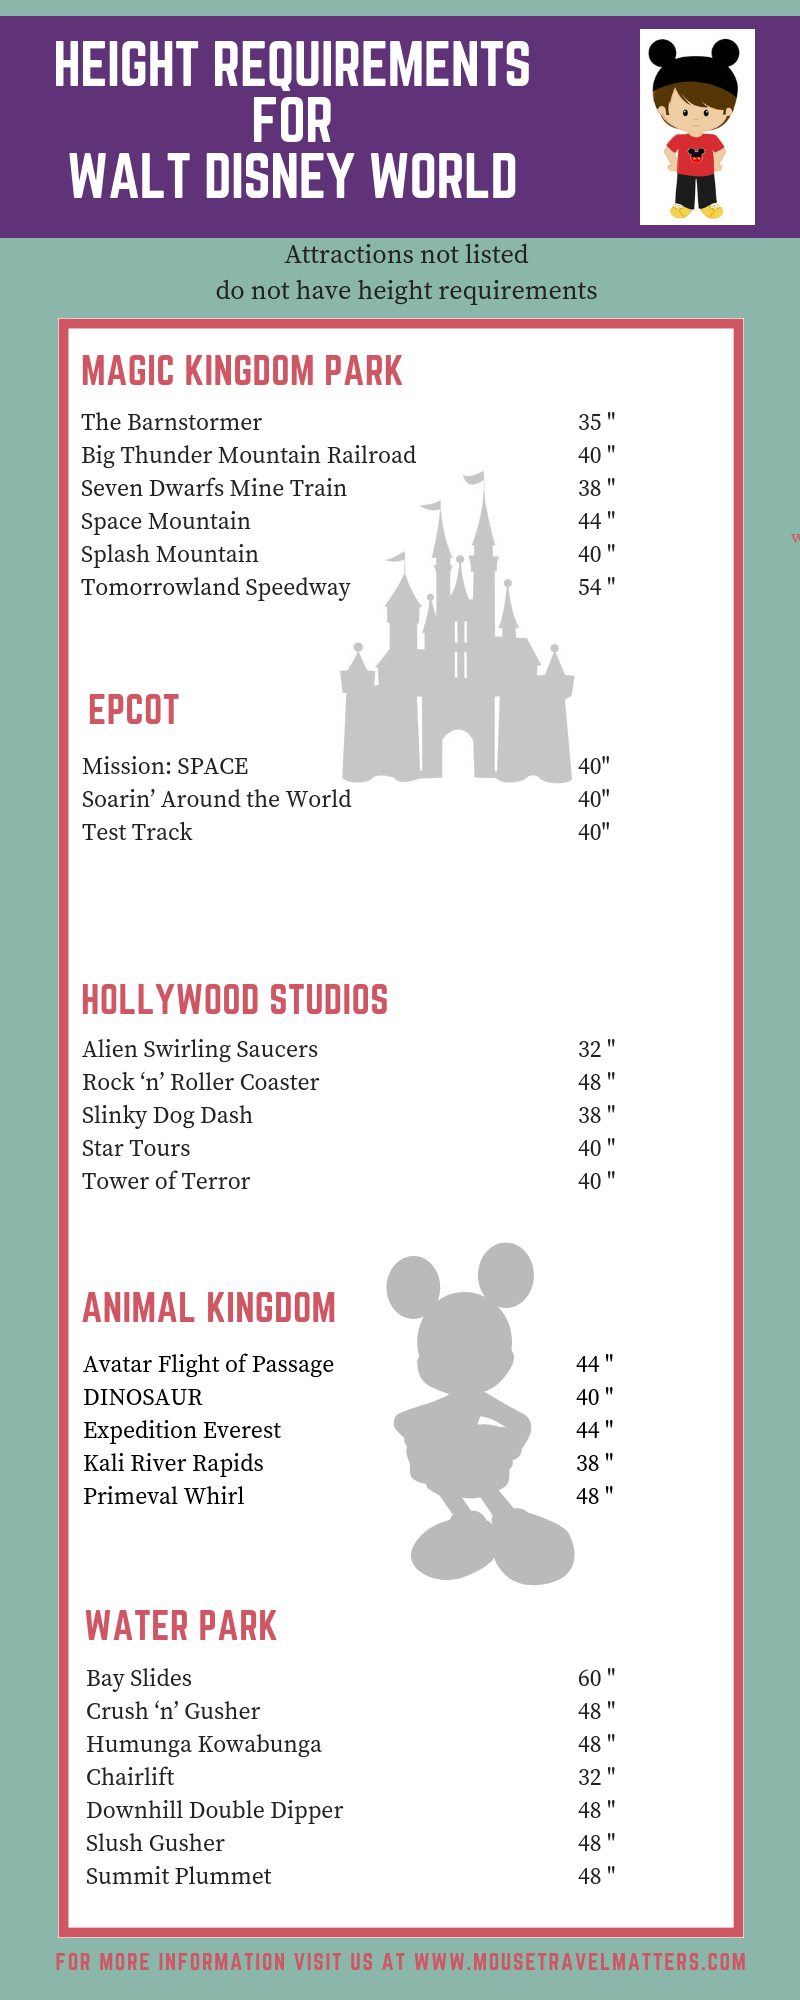 What Are The Height Requirements For Disney World In 2020